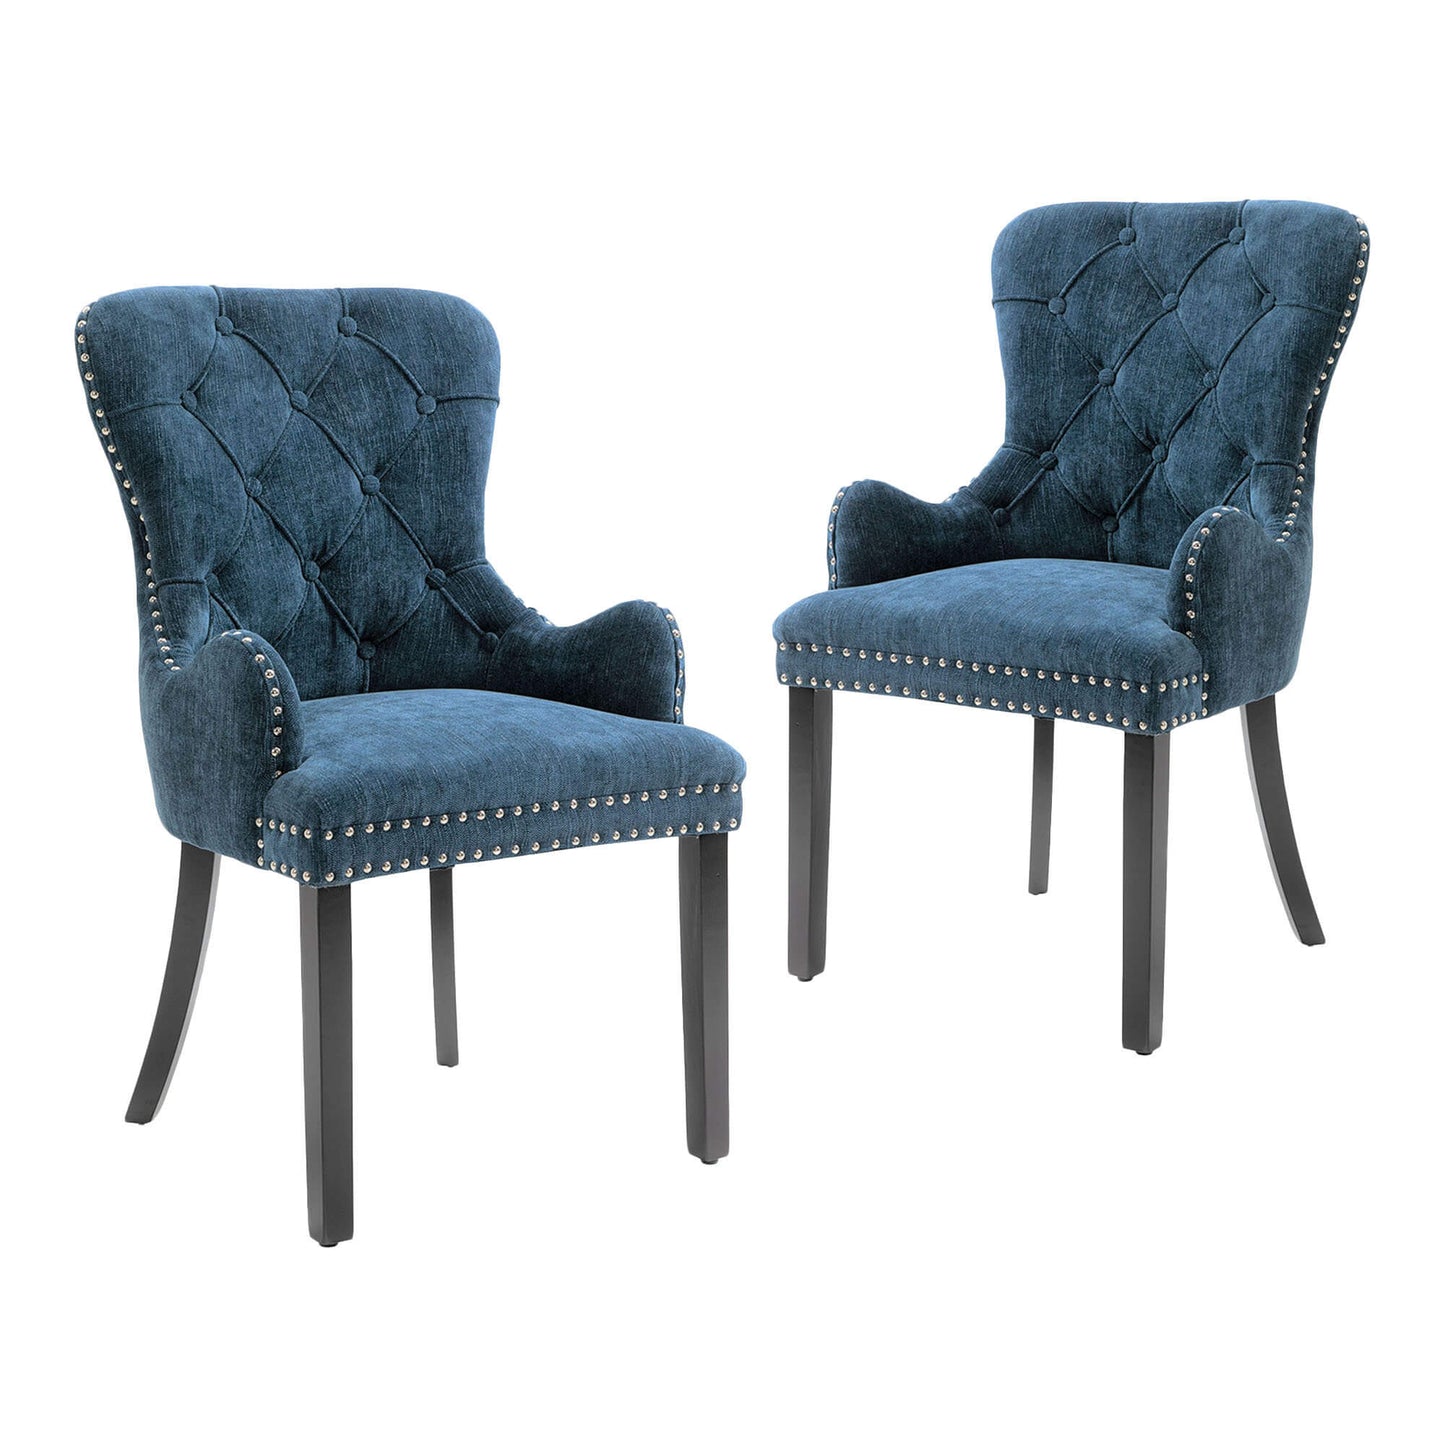 Genoa Version 1 | Fabric French Provincial Wooden Dining Chairs With Arms | Set Of 2 | Navy